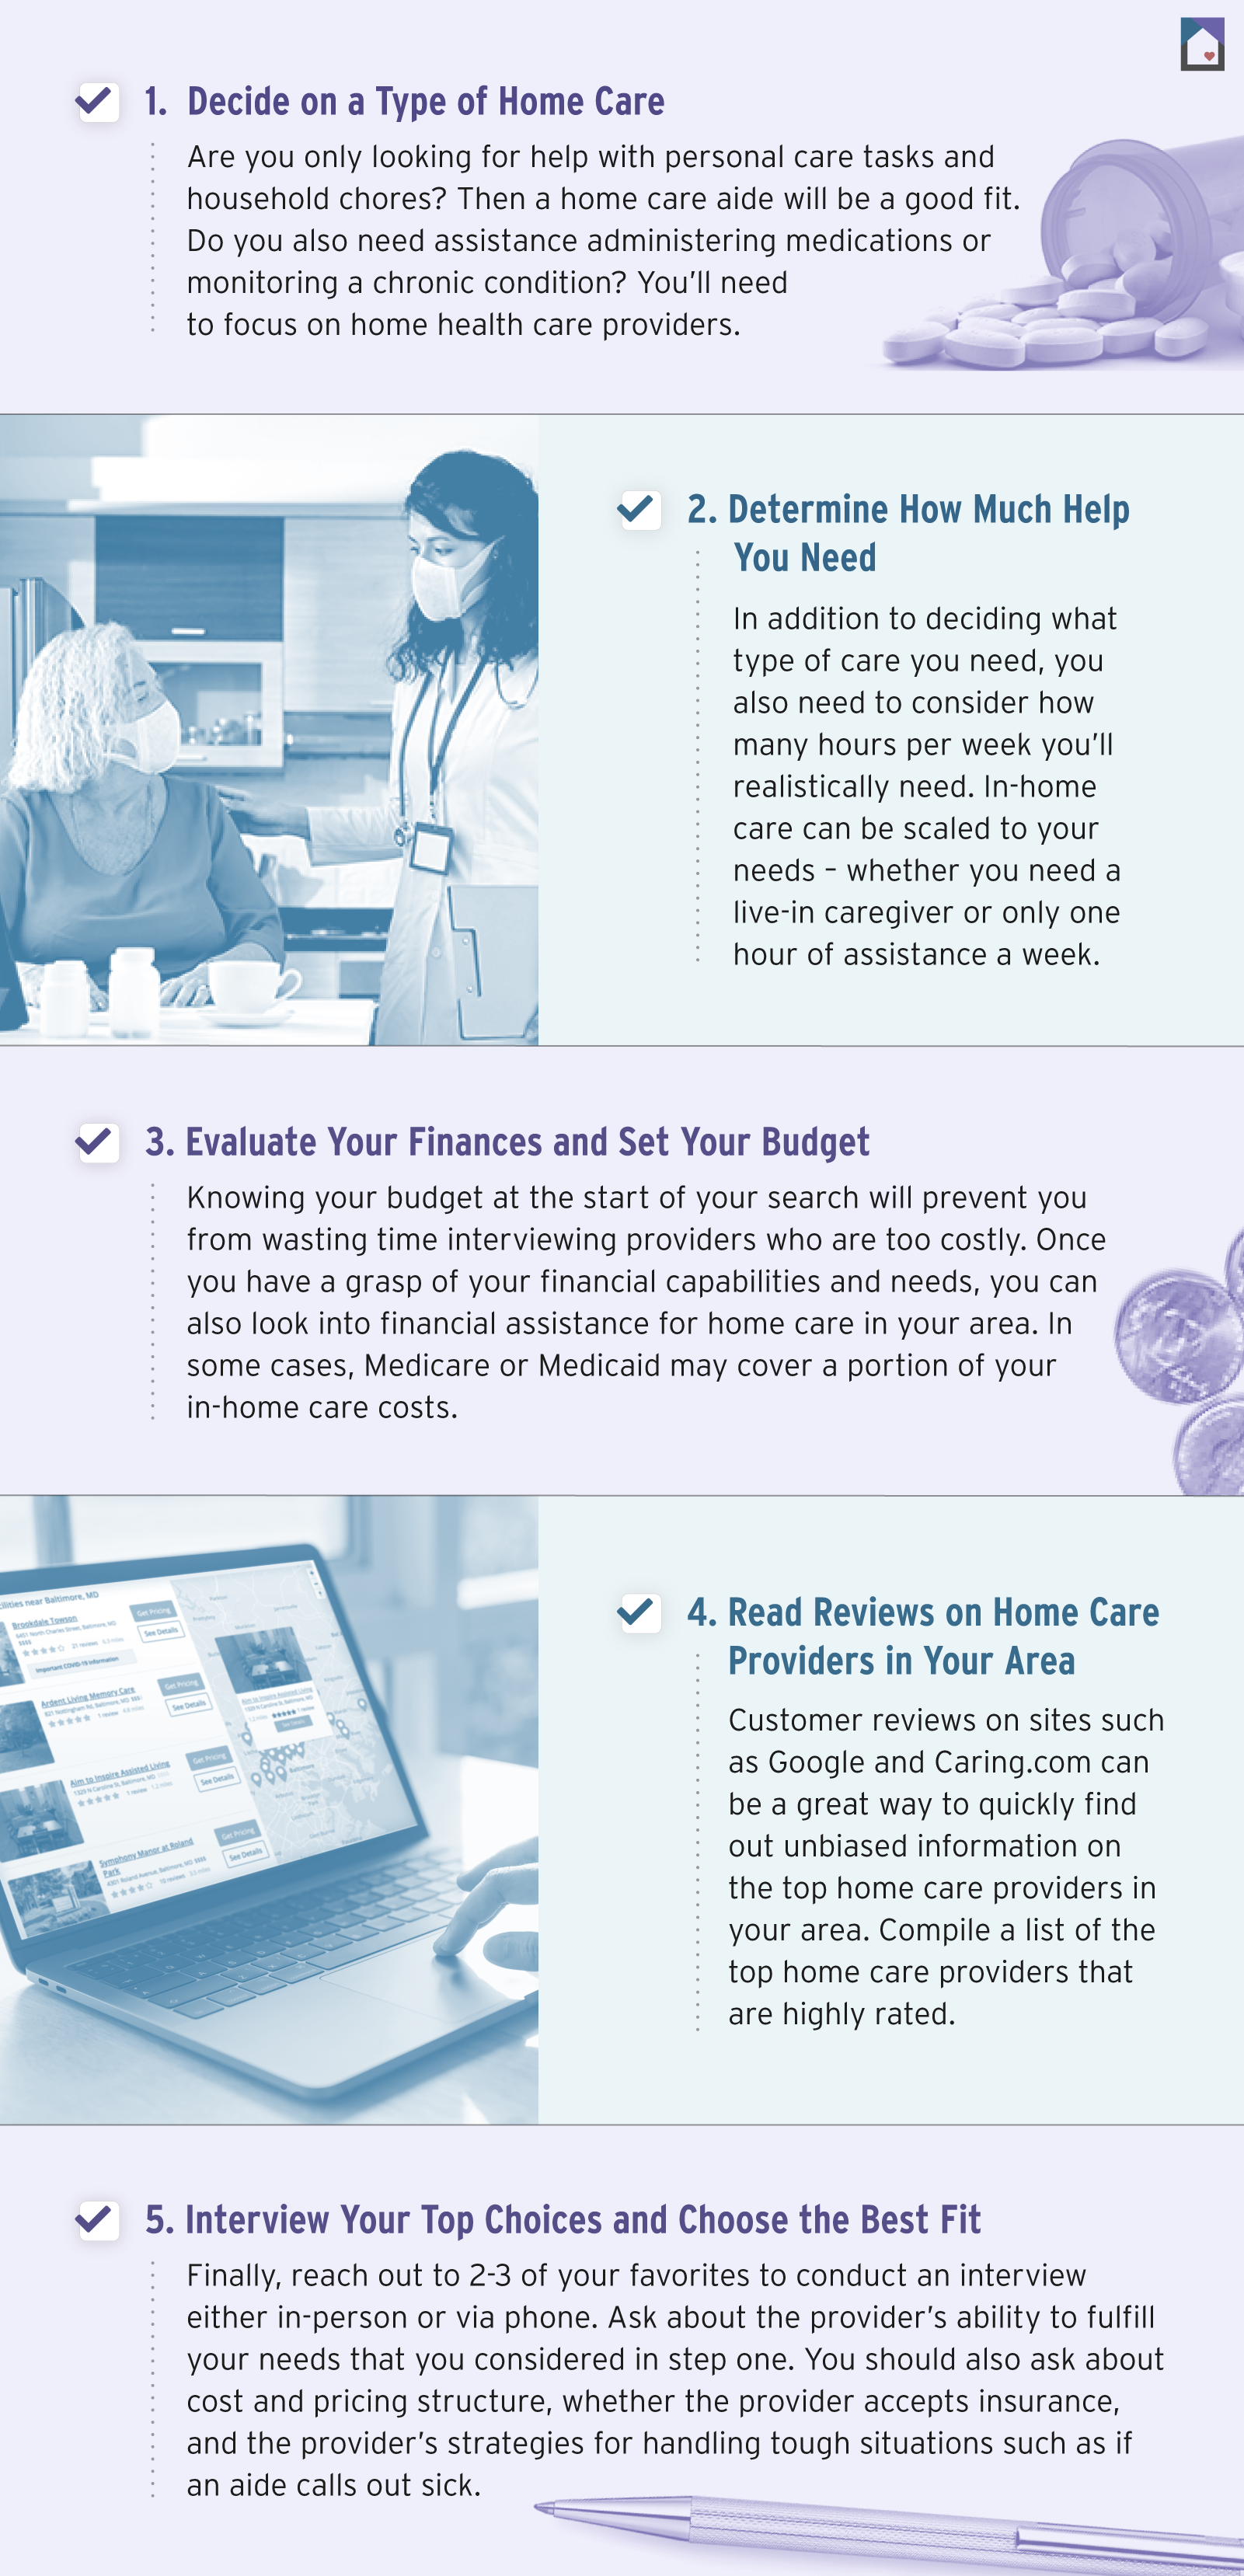 An infographic giving steps to finding a home care provider